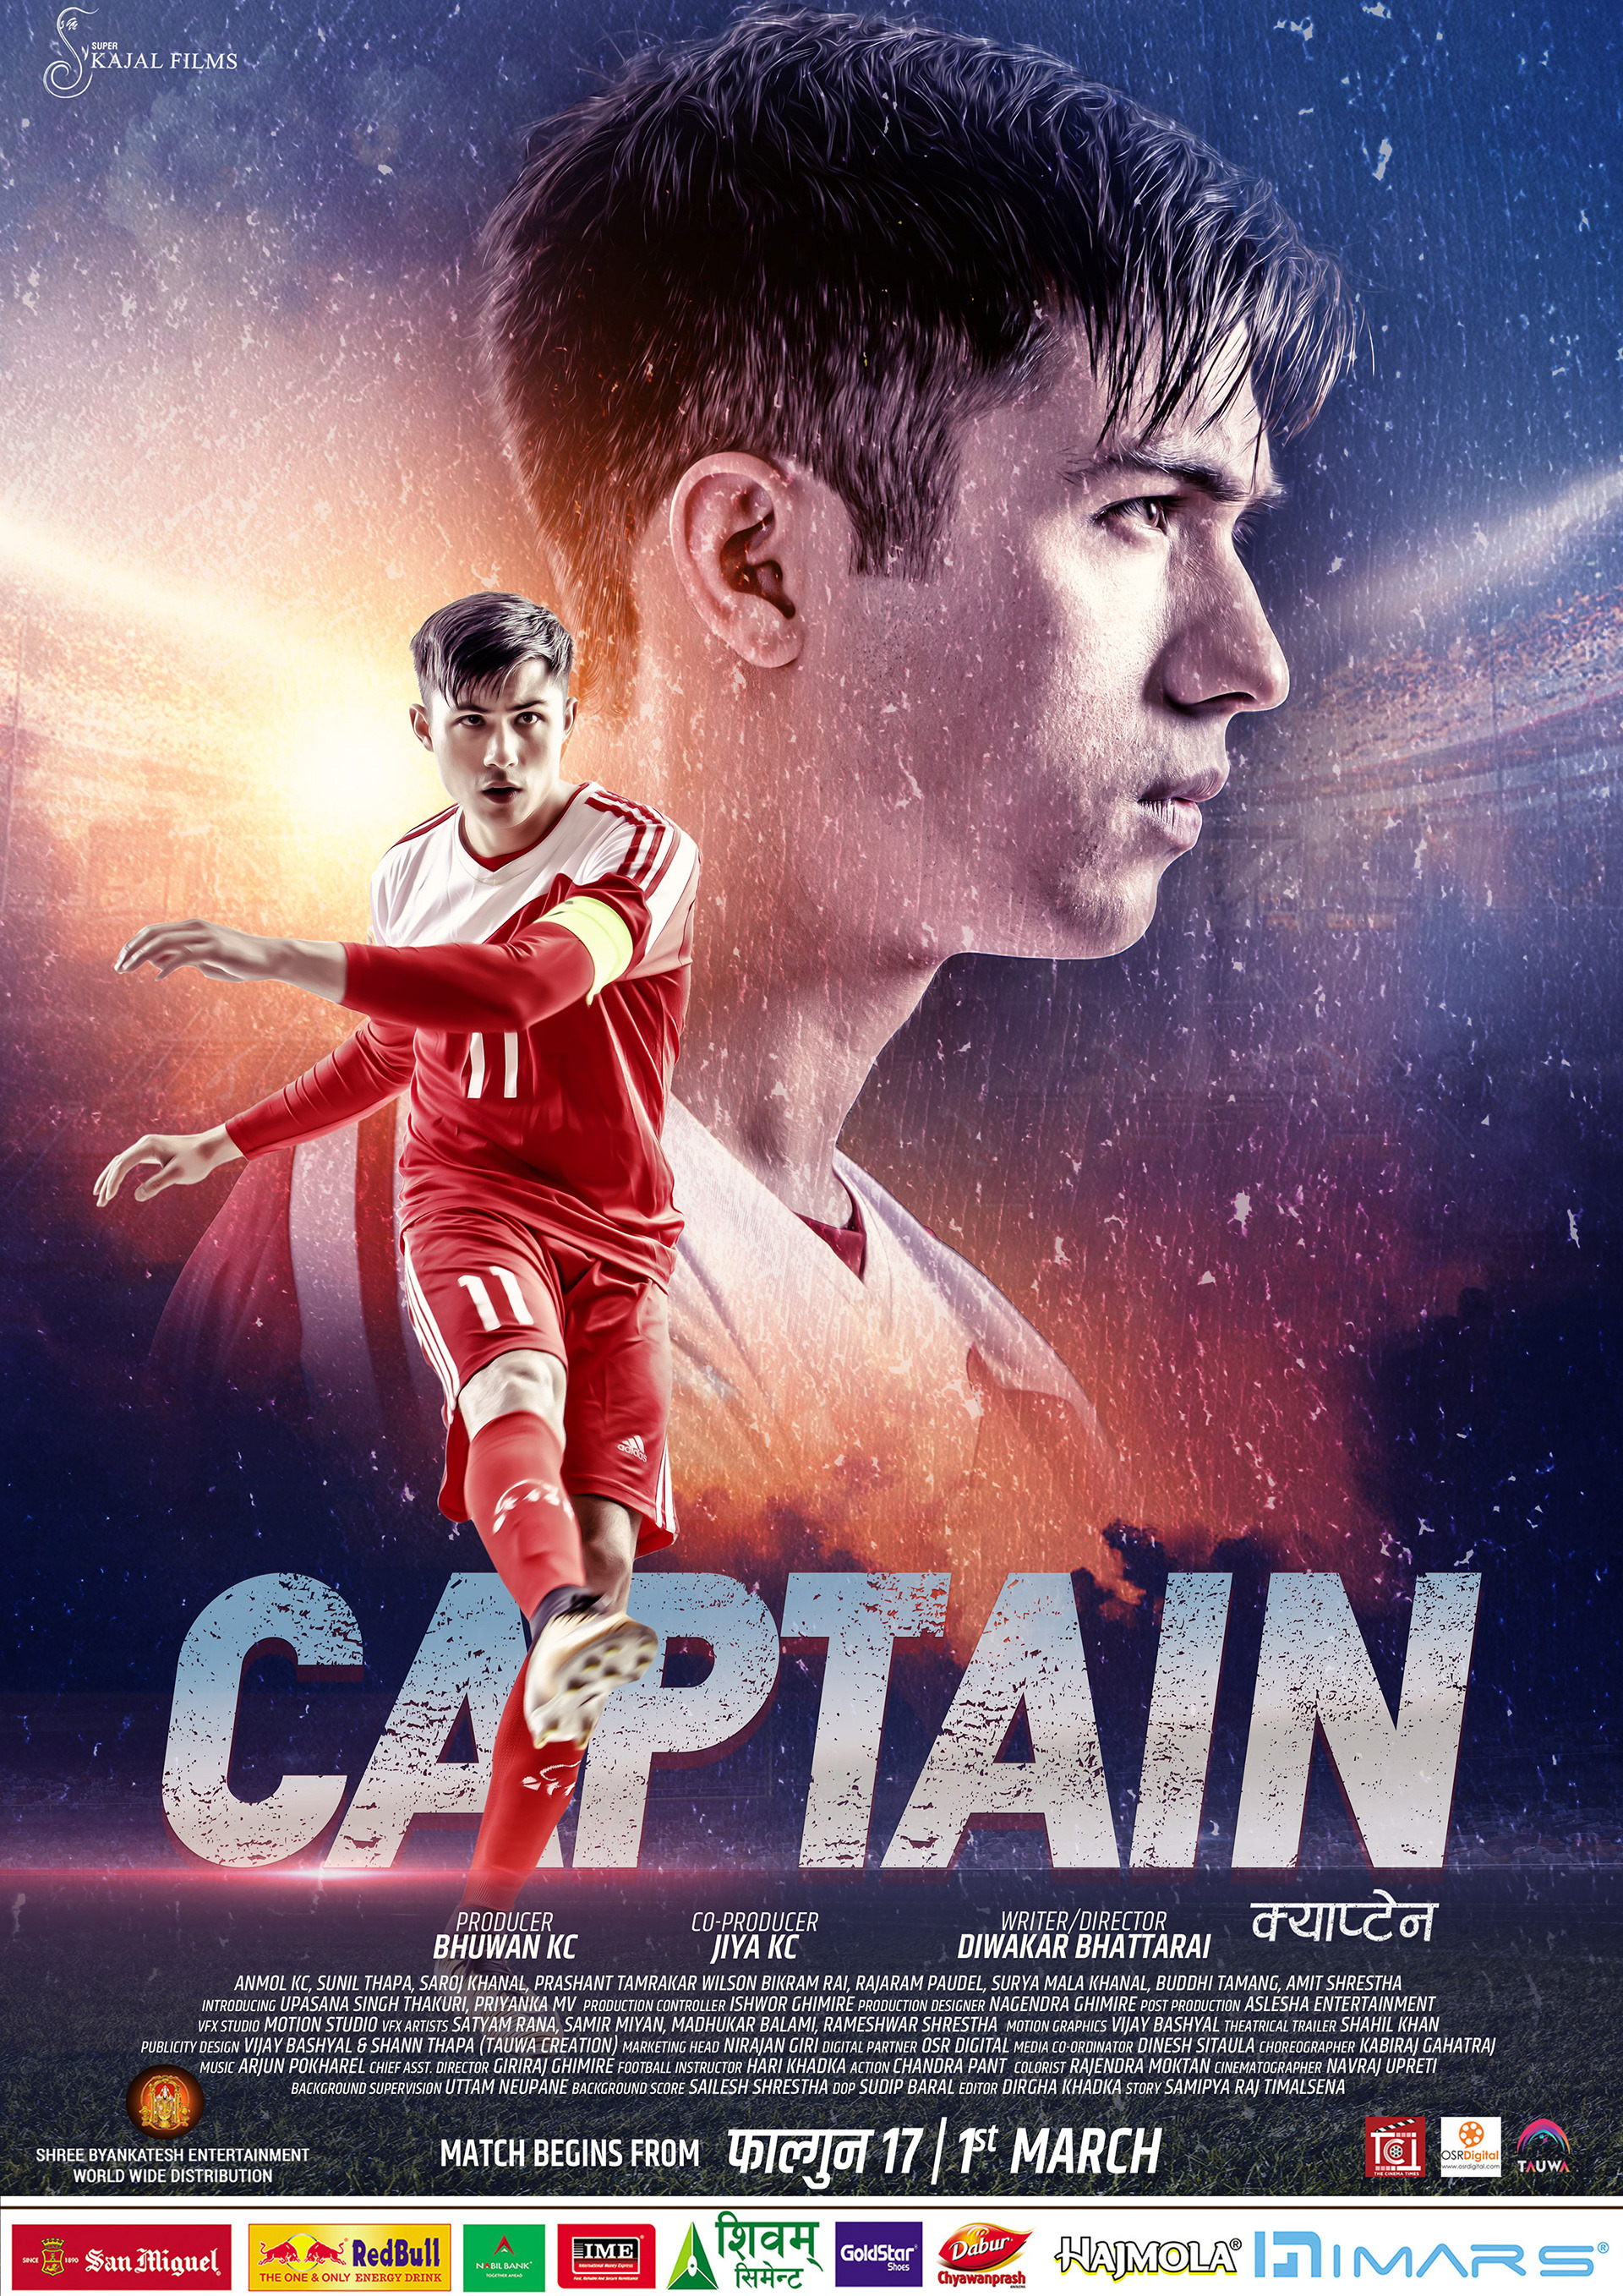 Mega Sized Movie Poster Image for Captain (#2 of 2)